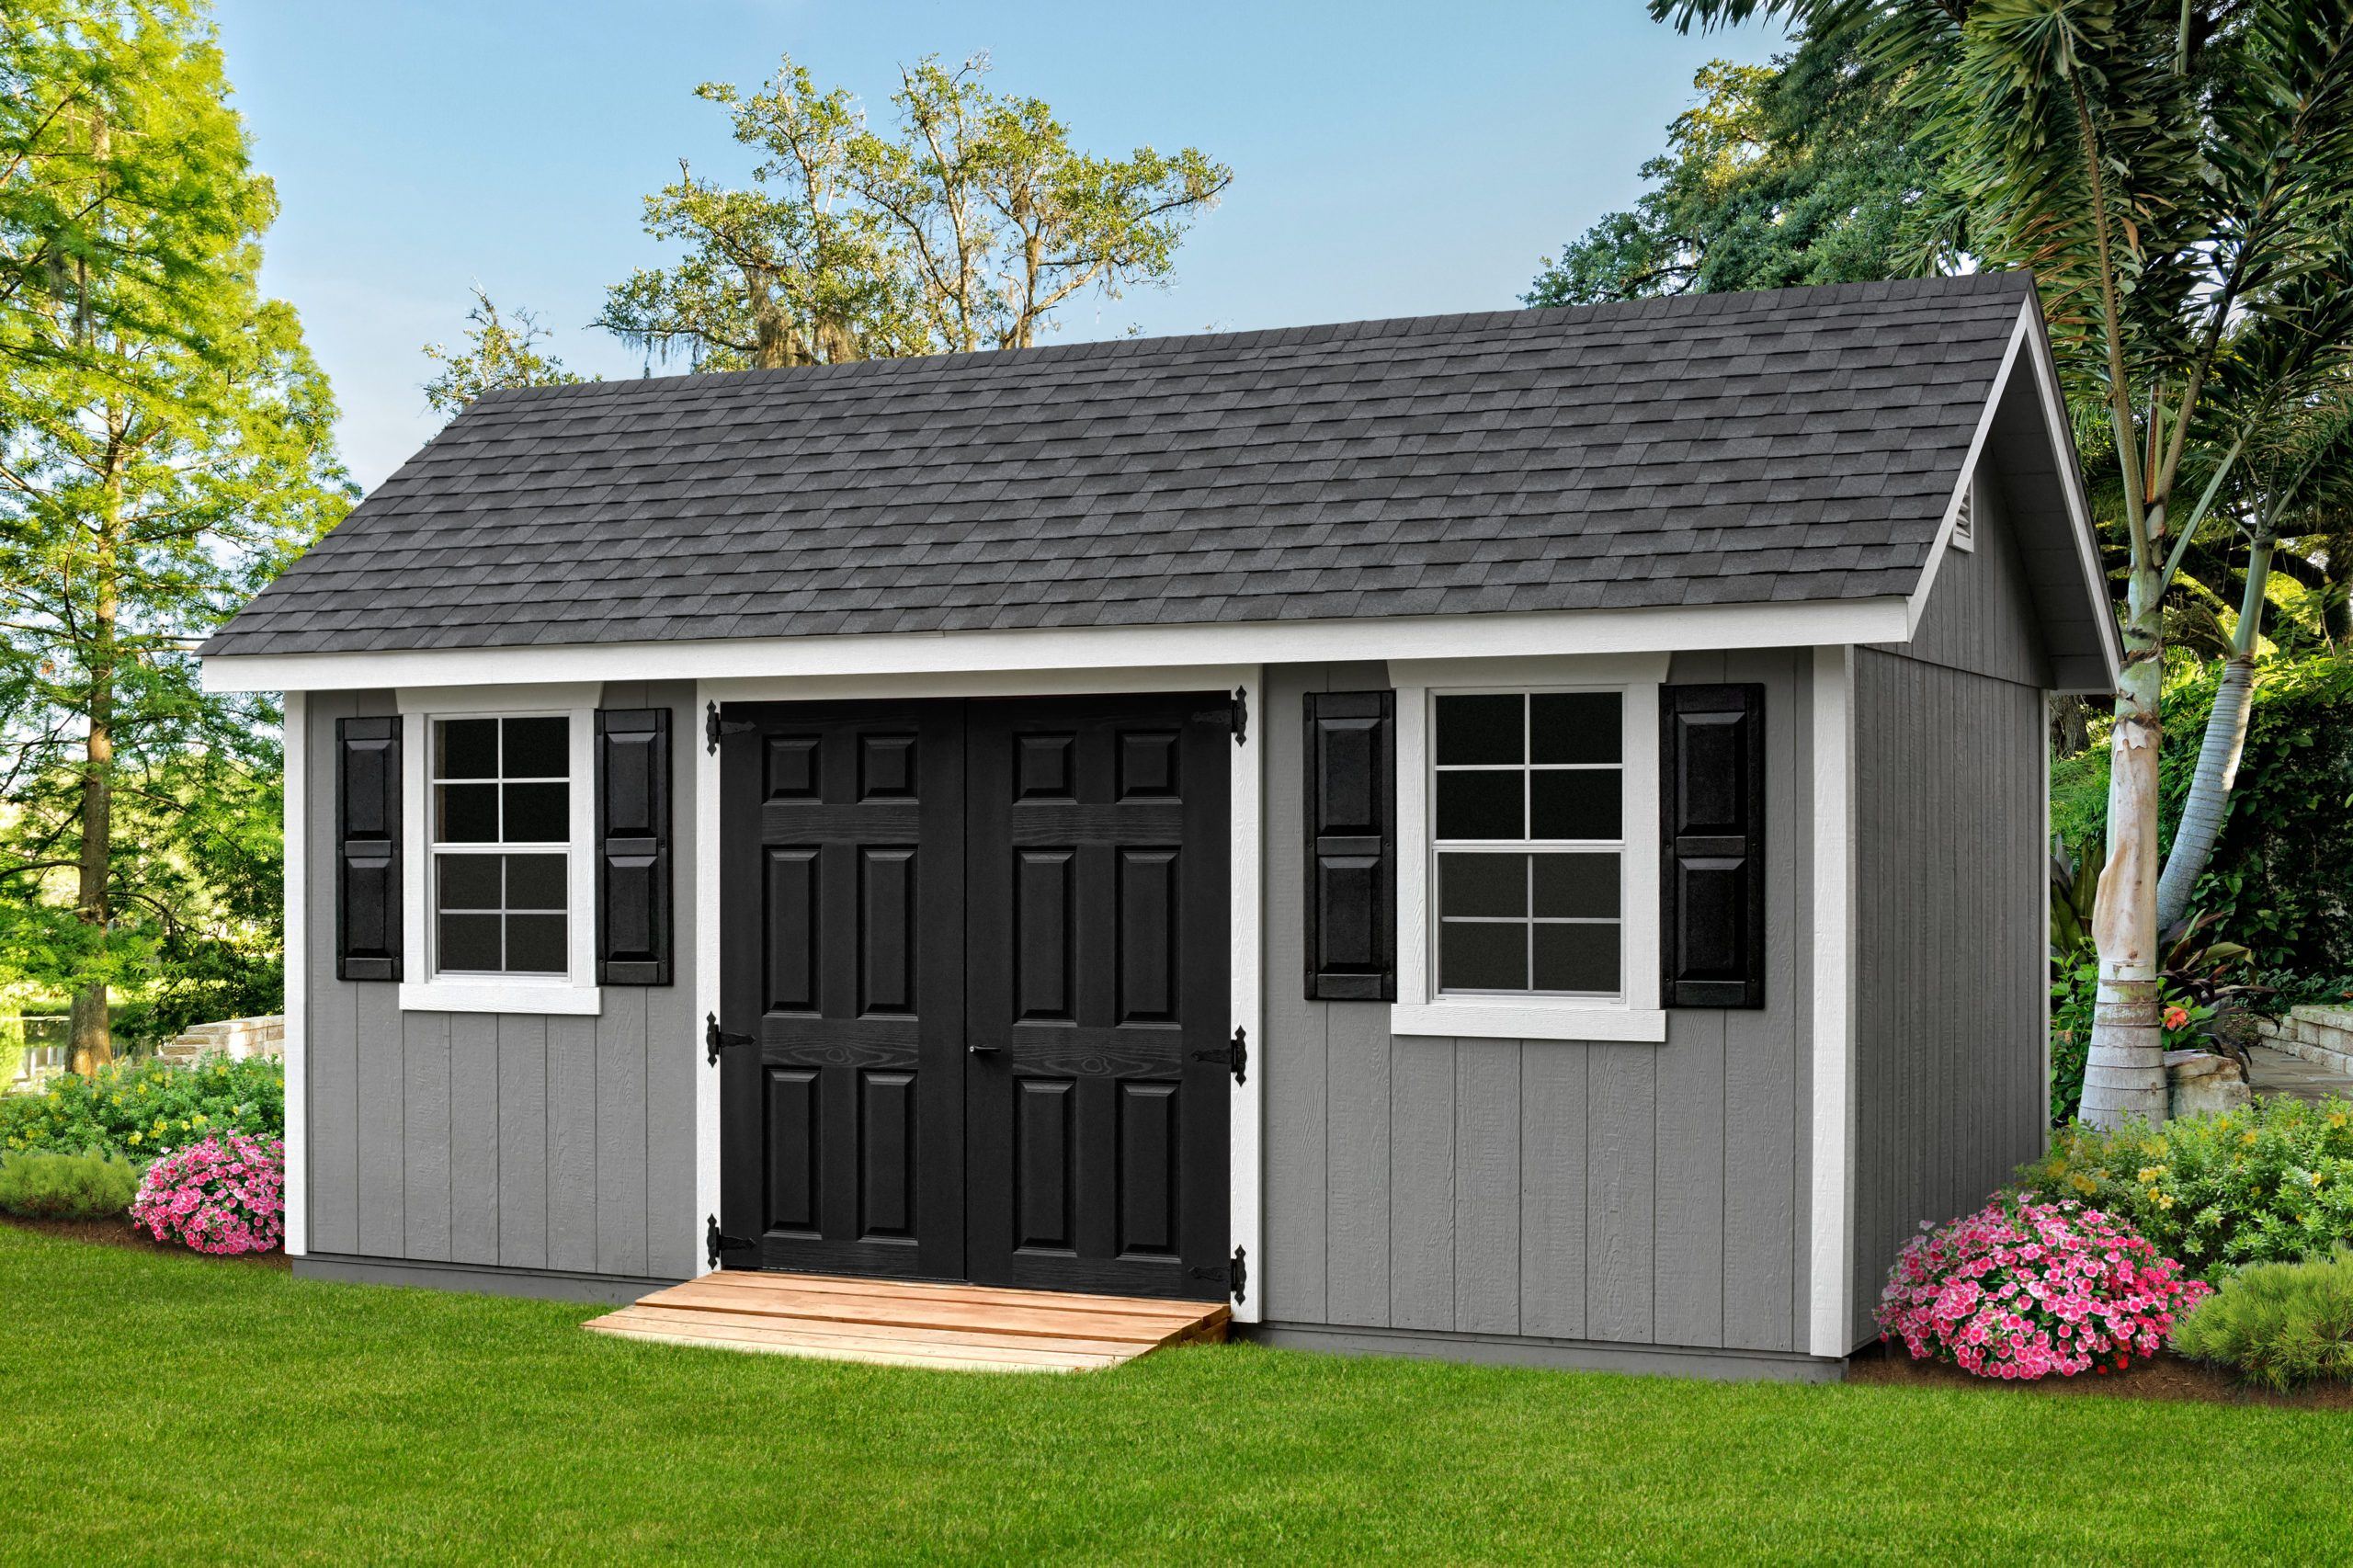 5 Ways that Building a Shed Adds Value to Your Home